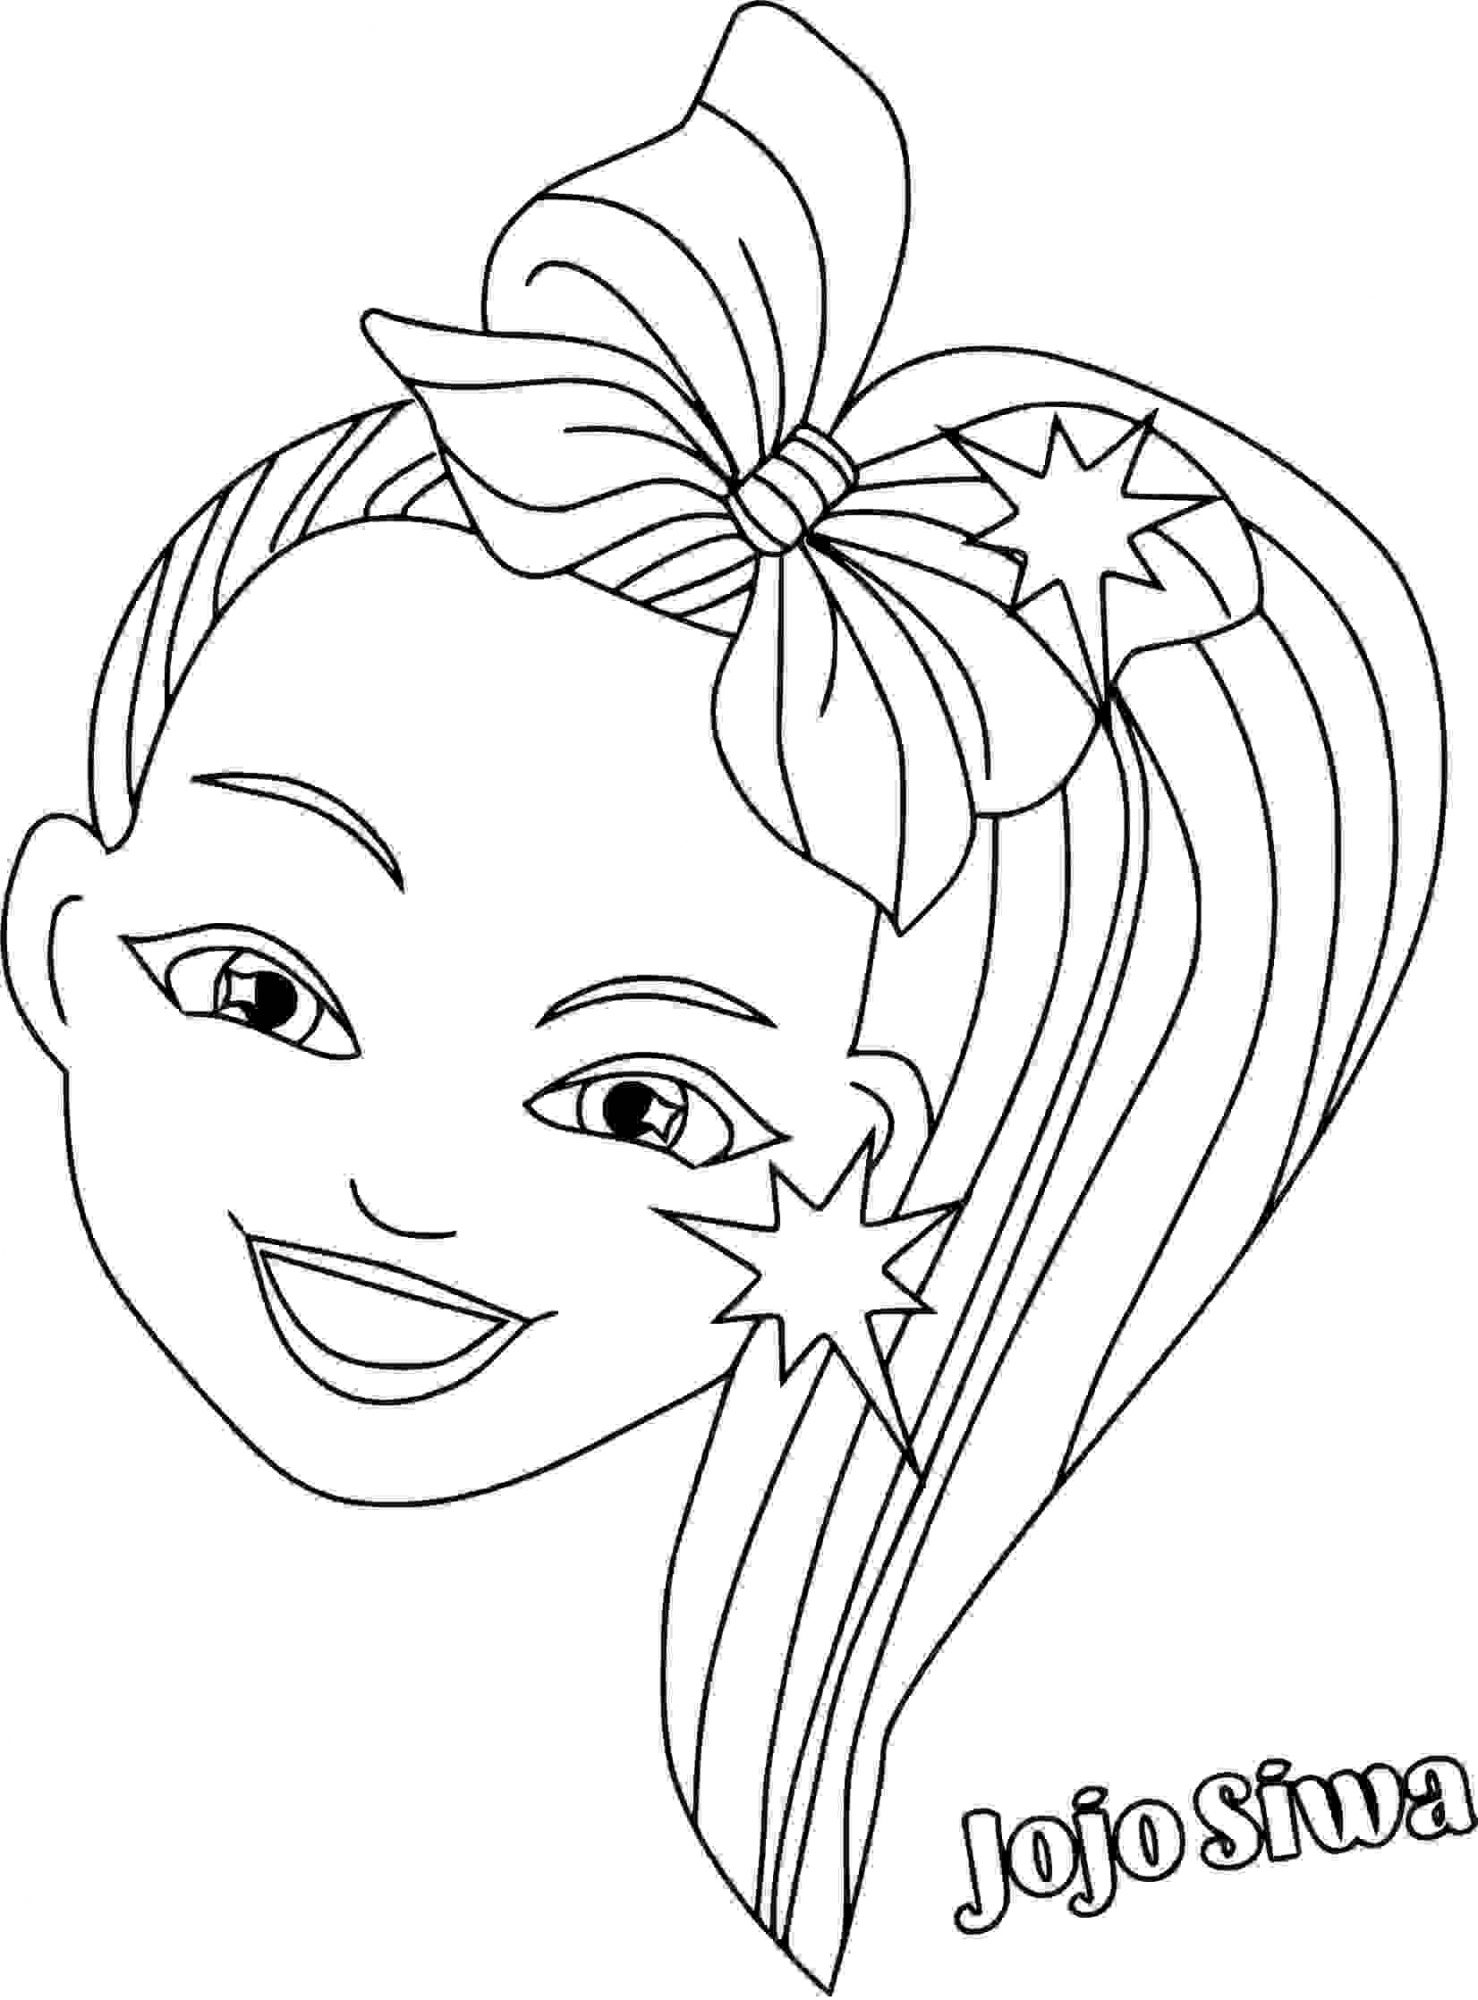 Jojo Siwa Coloring Pages   Coloring Pages For Kids And Adults